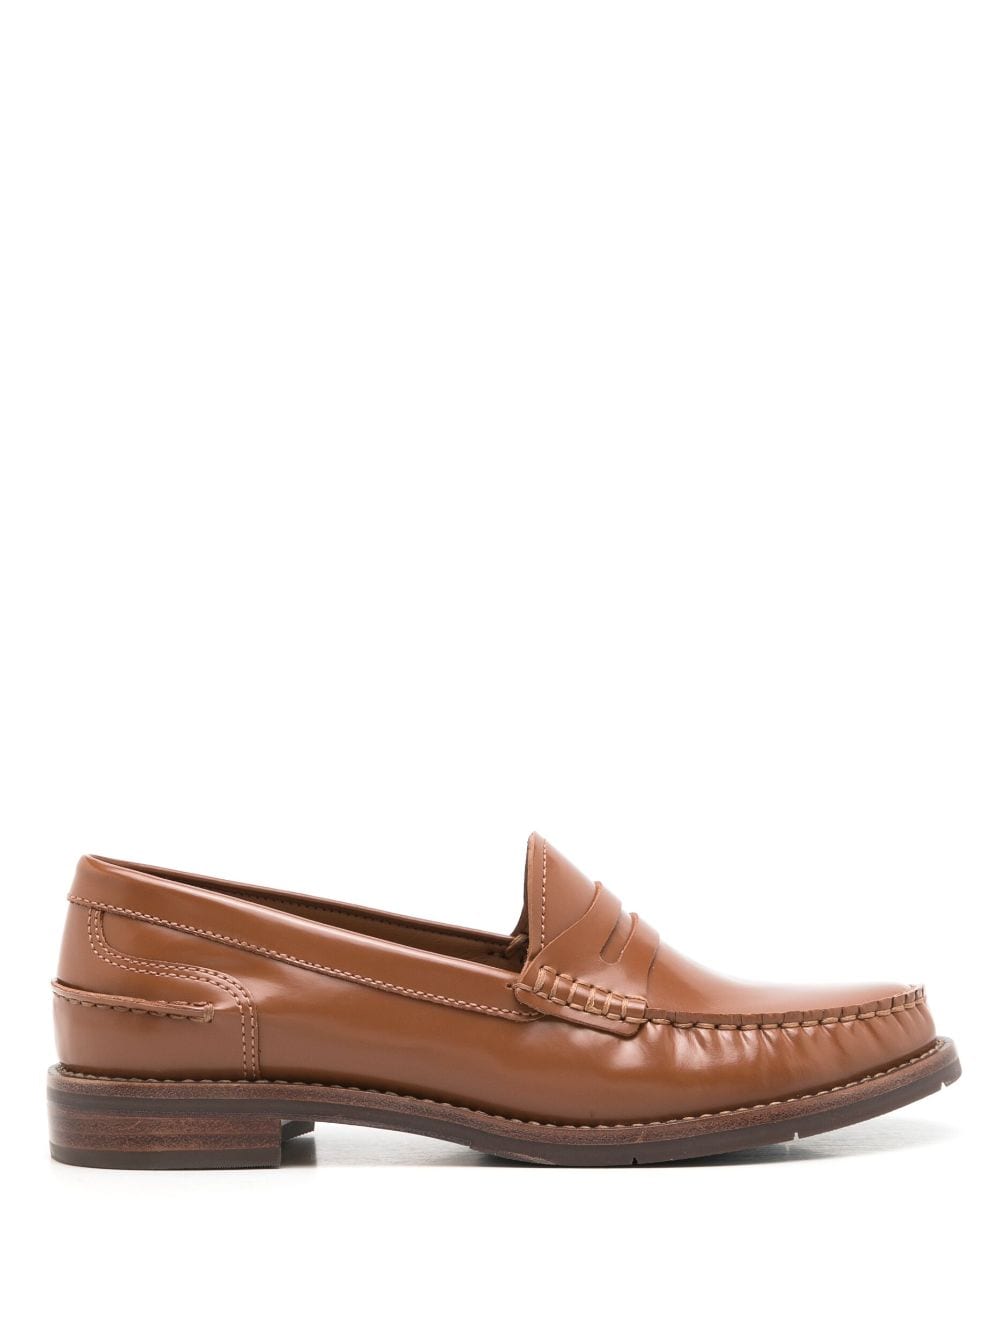 Sarah Chofakian Rive Gauche Leather Loafers In Brown